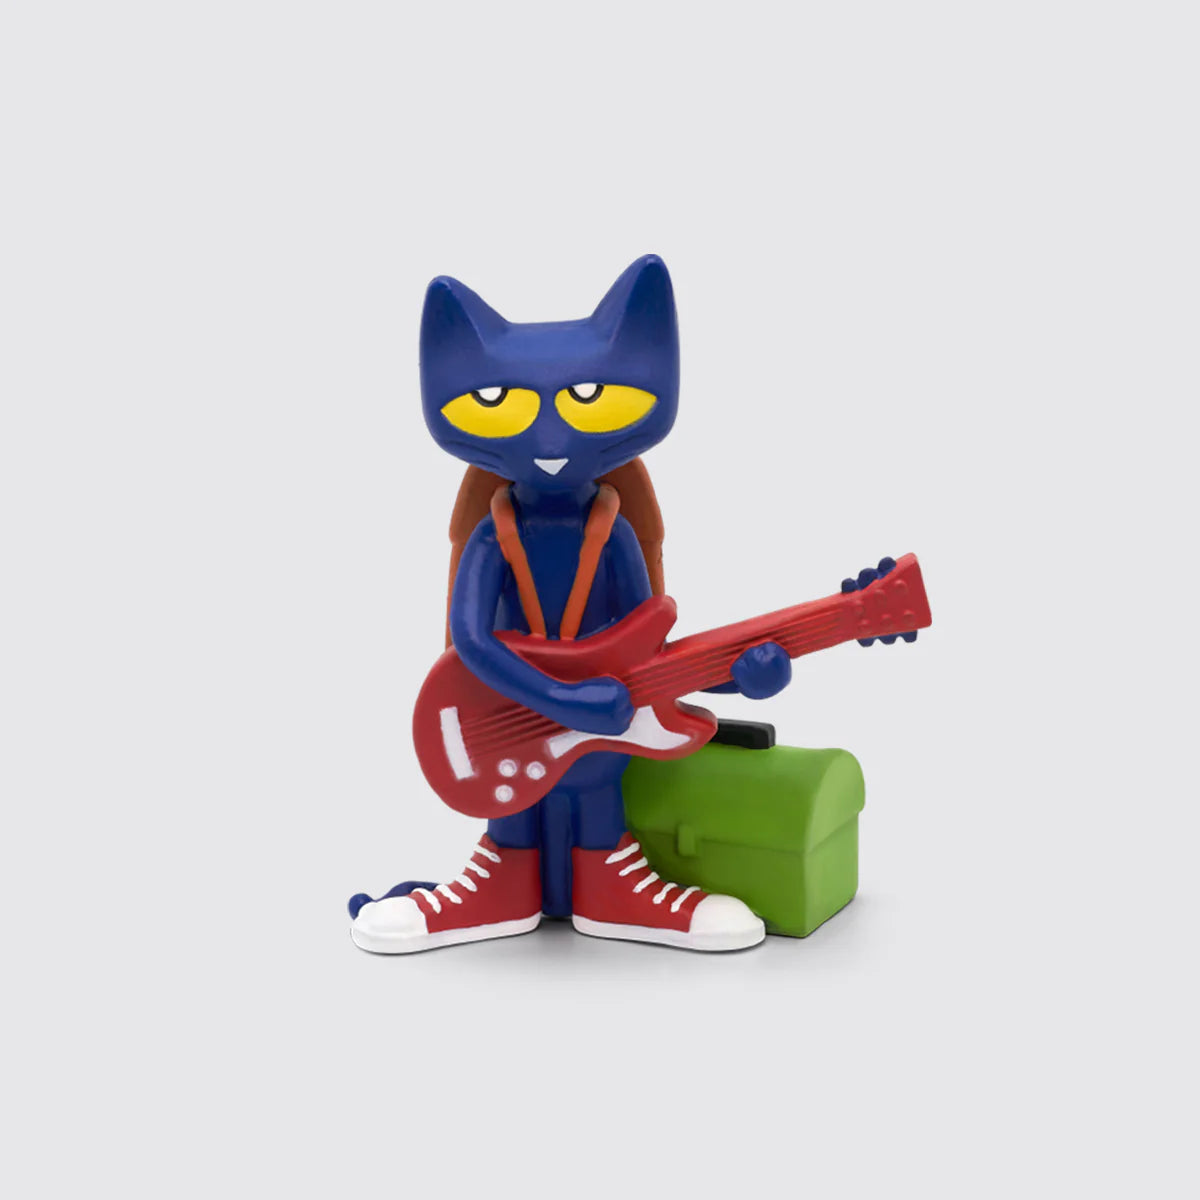 Pete The Cat 2 by Tonies #10001870